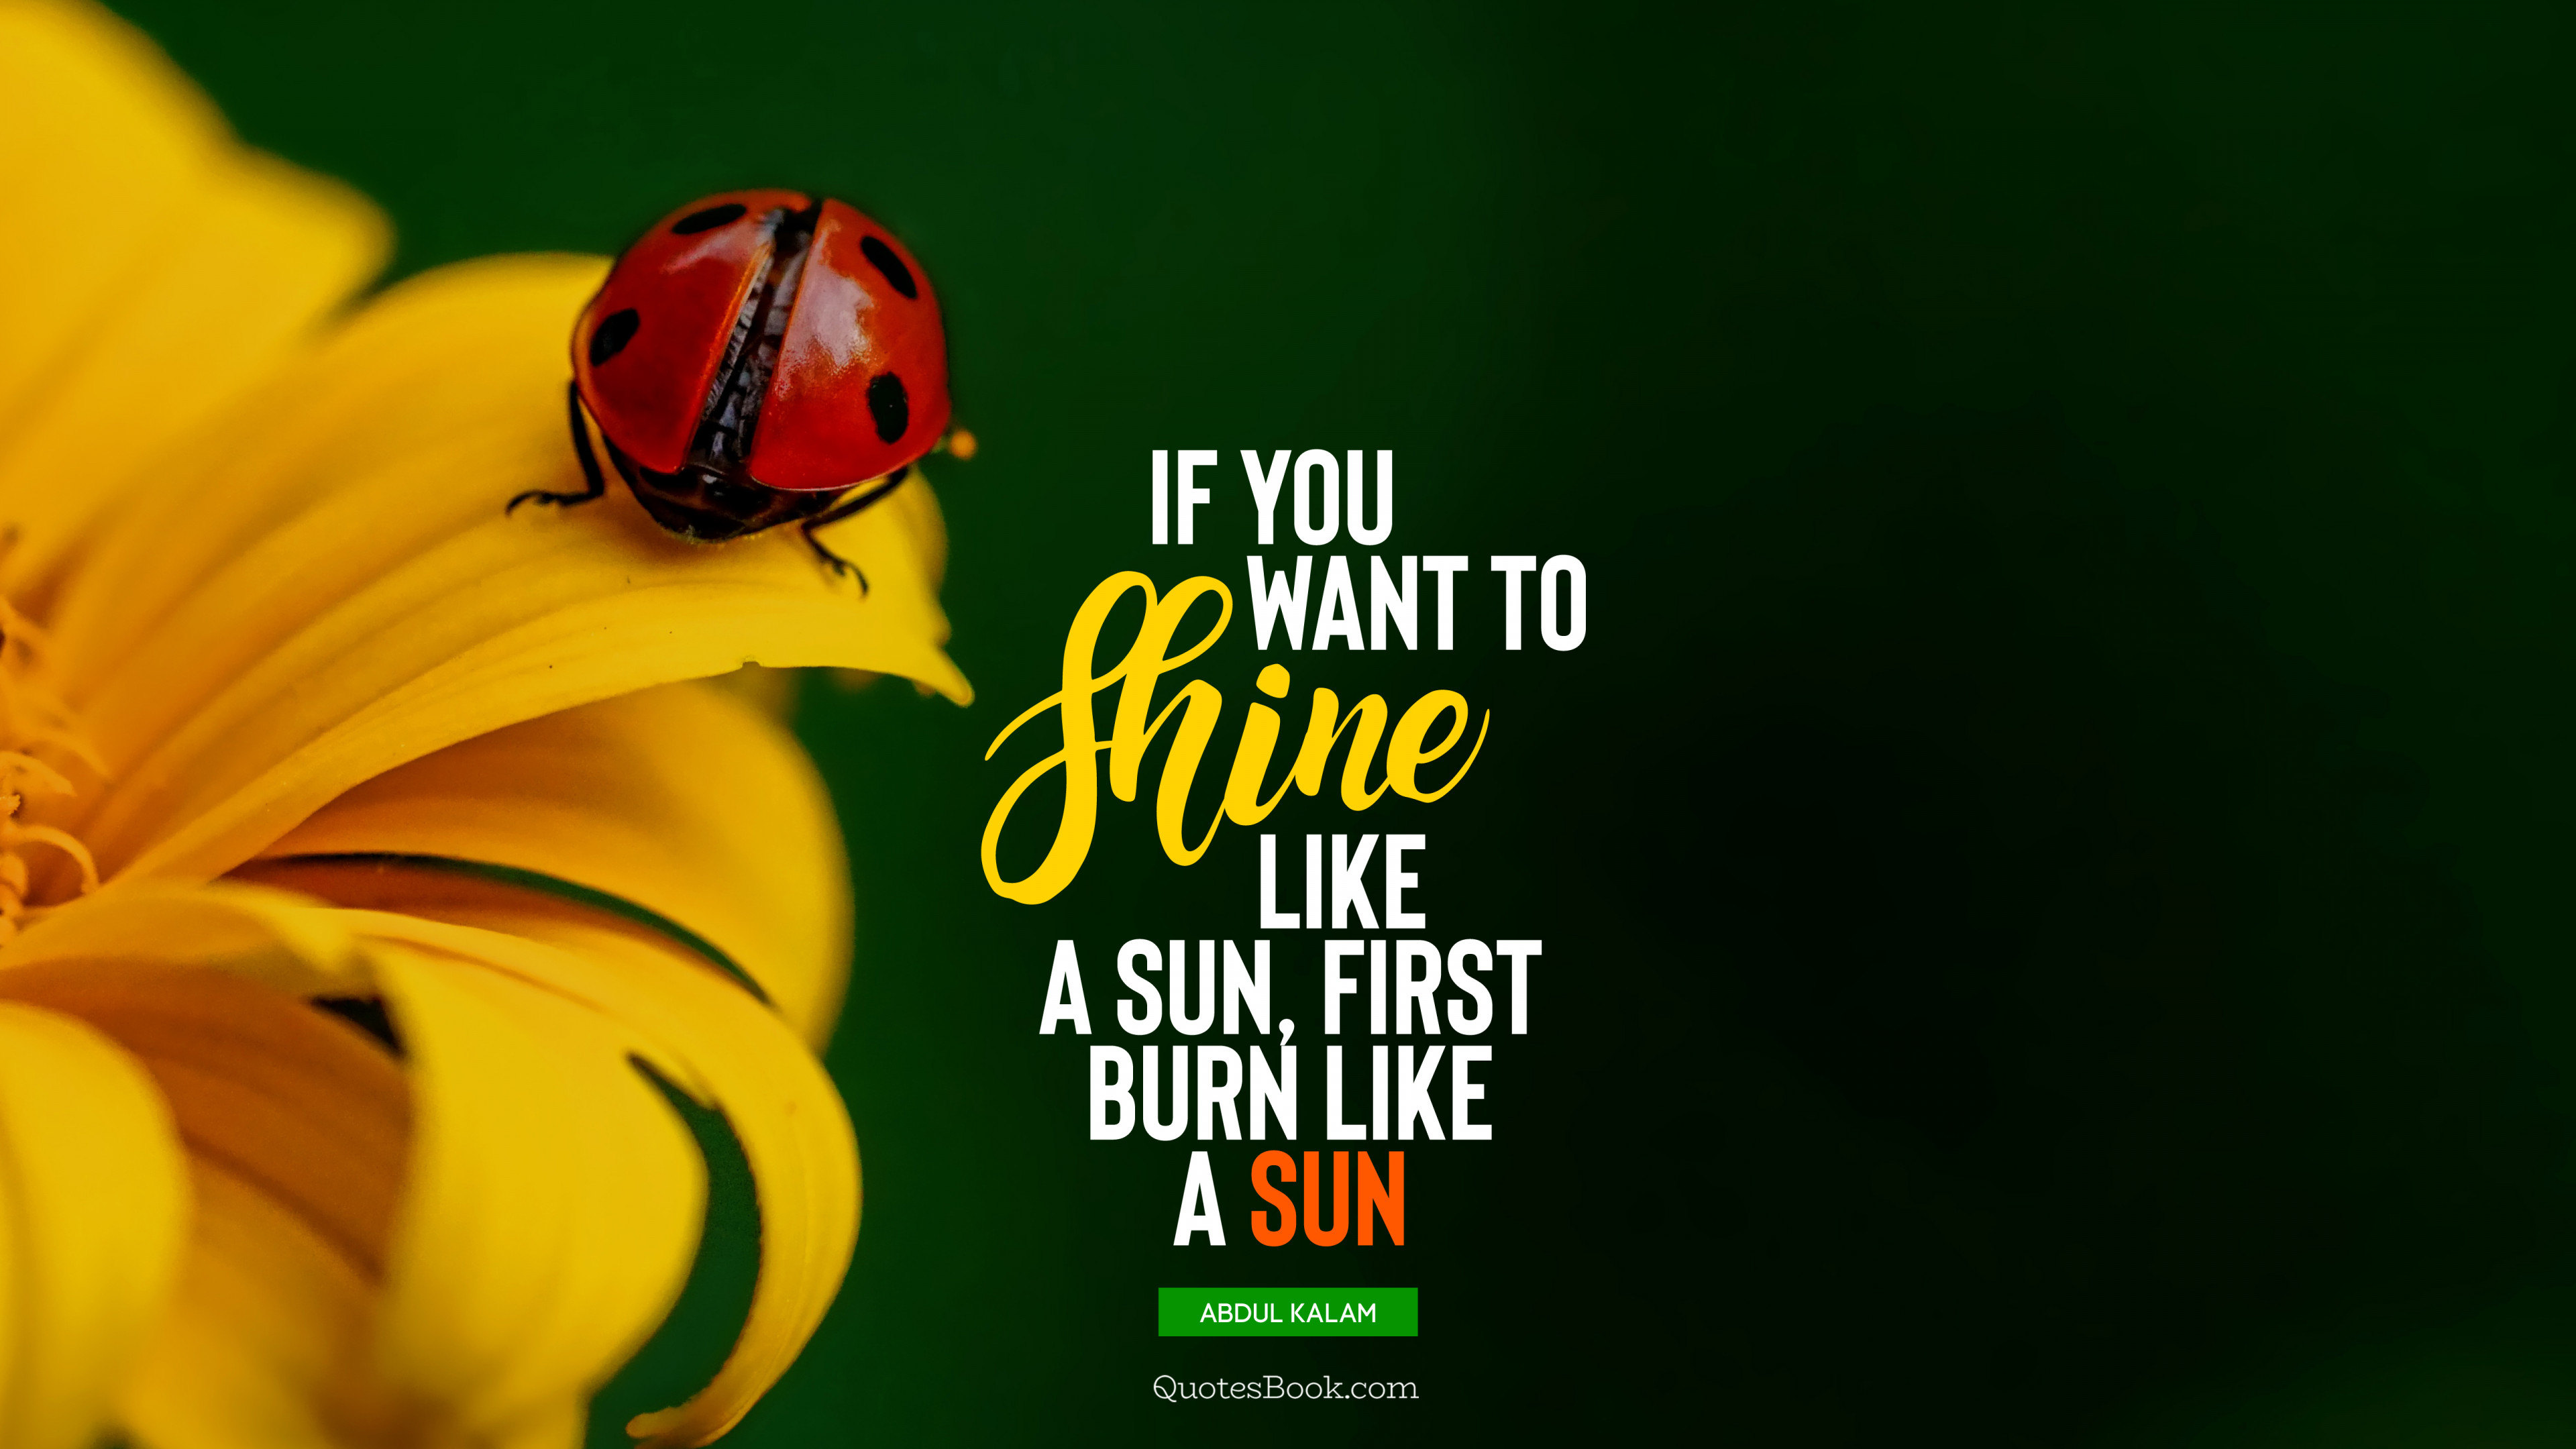 If you want to shine like a sun, first burn like a sun. - Quote by